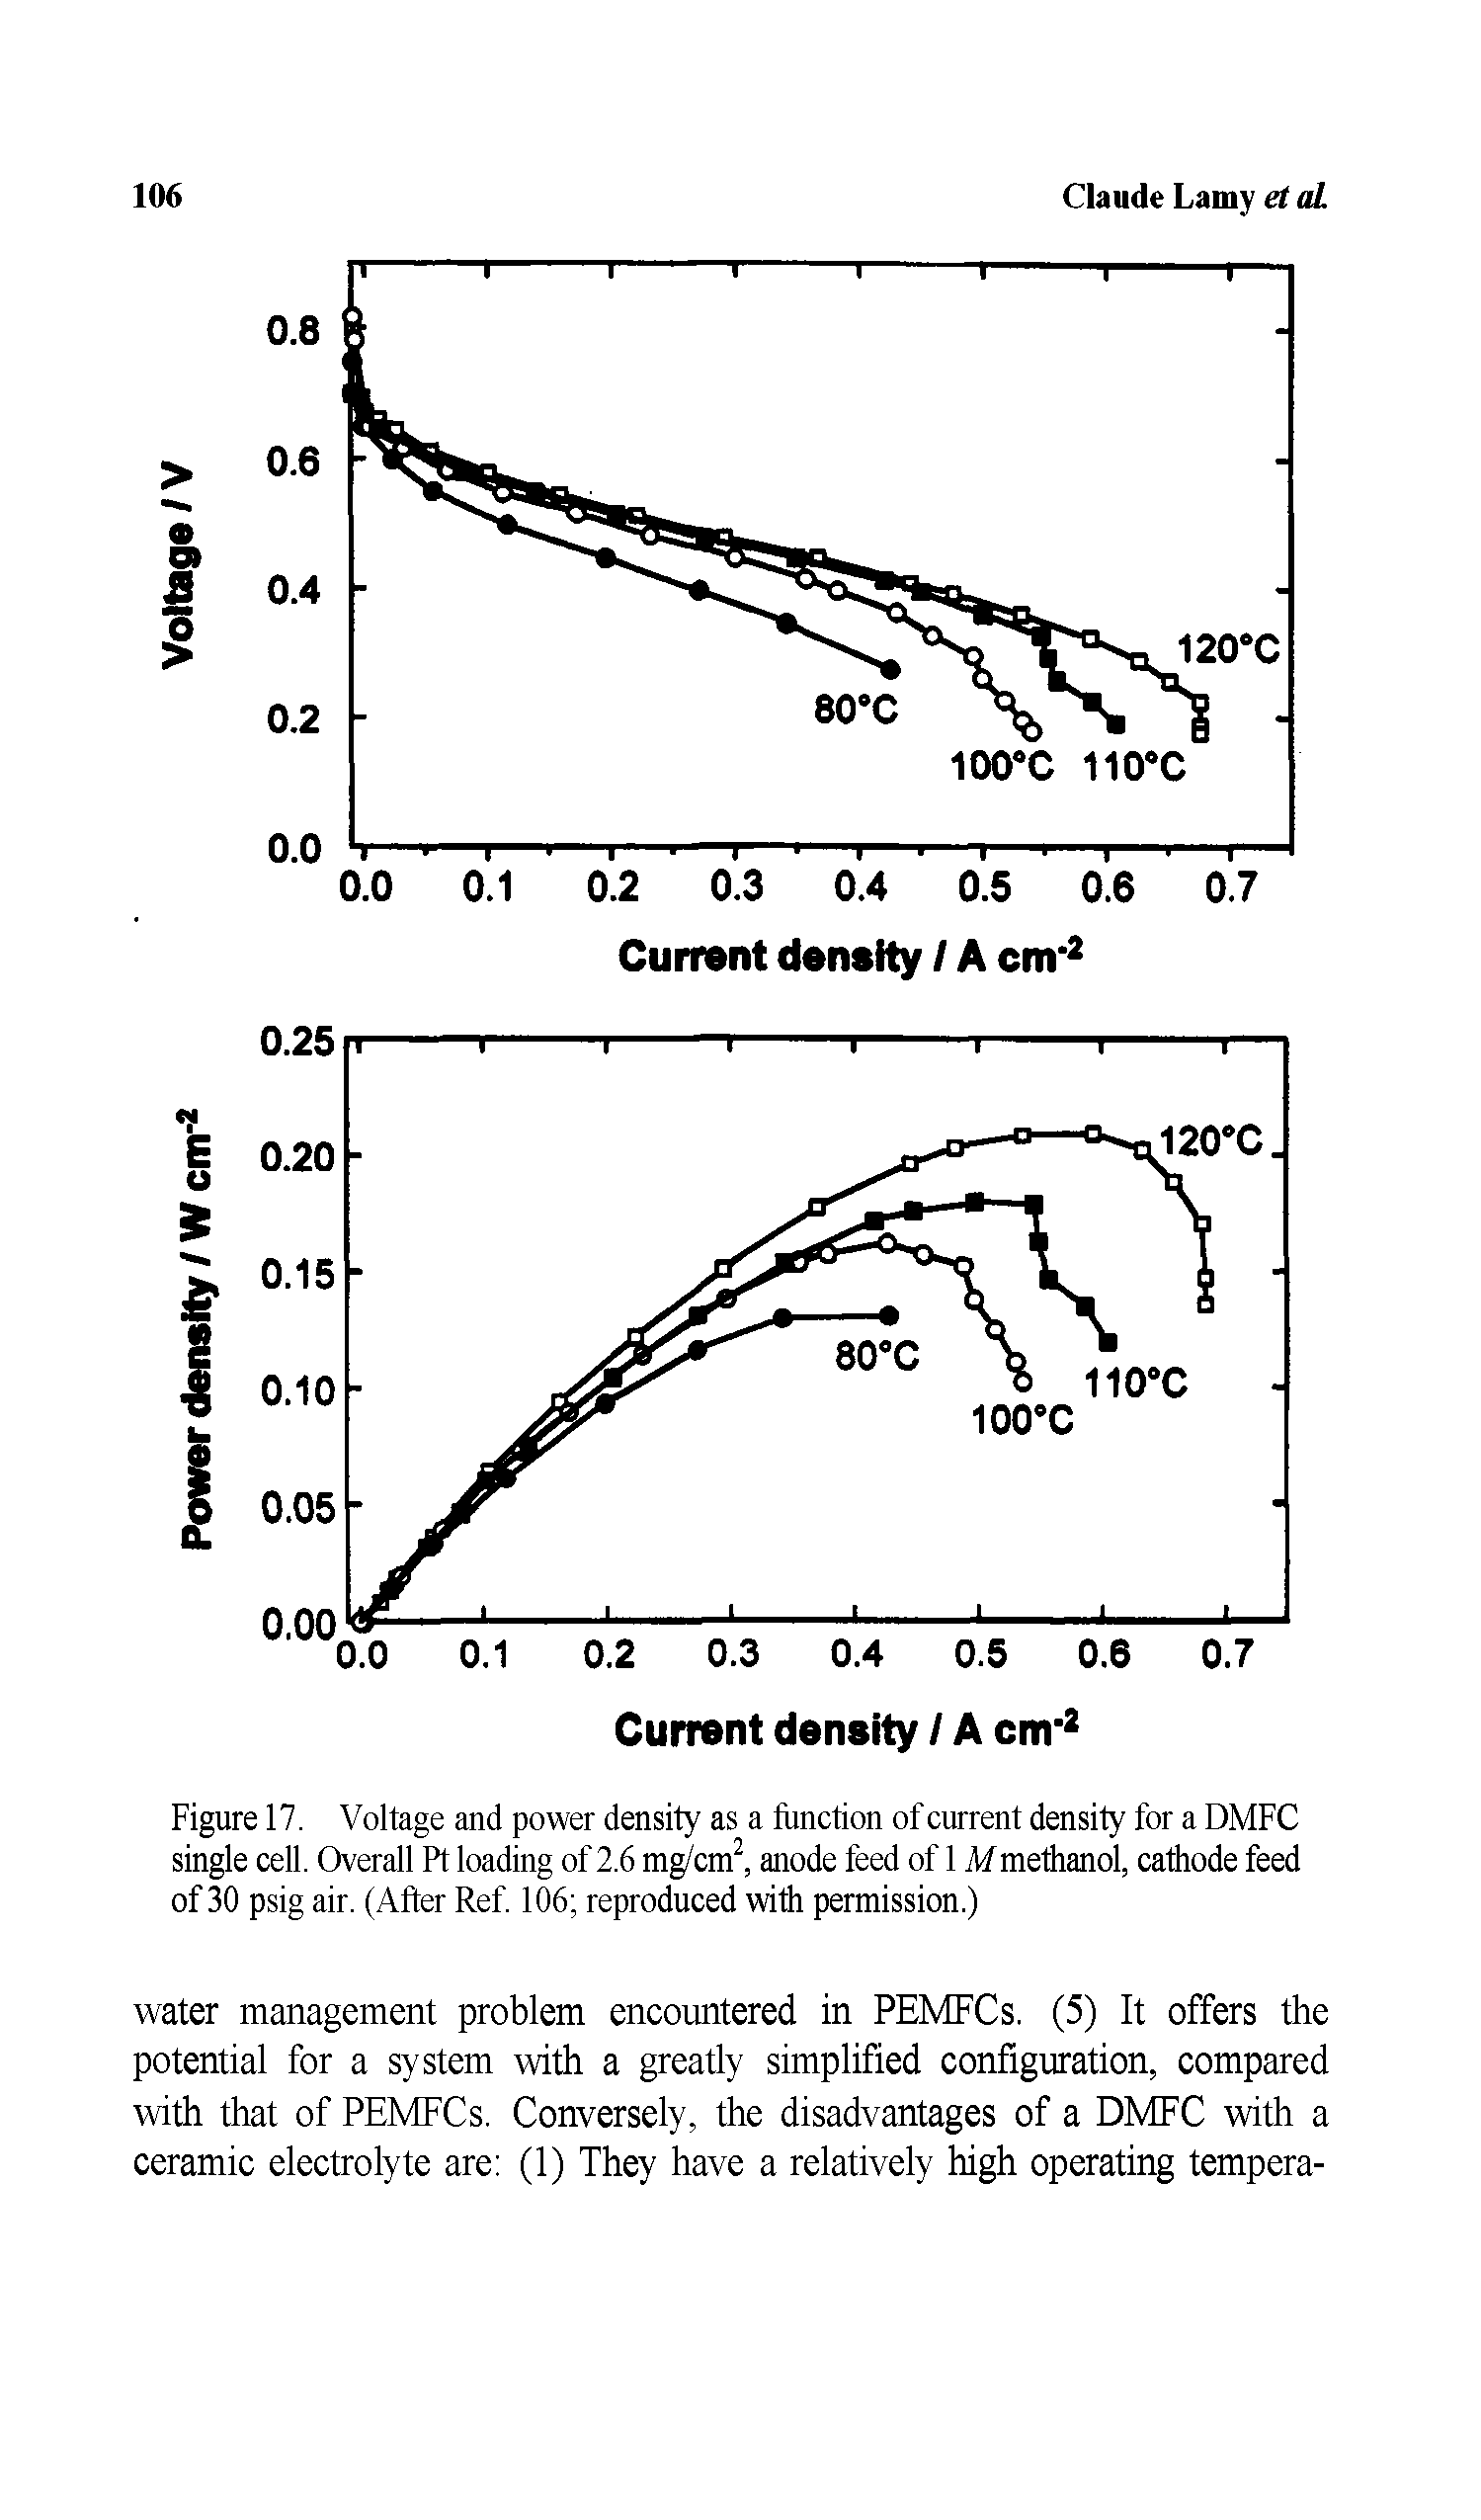 Figure 17. Voltage and power density as a function of current density for a DMFC single cell. Overall Pt loading of 2.6 mg/cm, anode feed of 1 Mmethanol, cathode feed of 30 psig air. (After Ref 106 reproduced with permission.)...